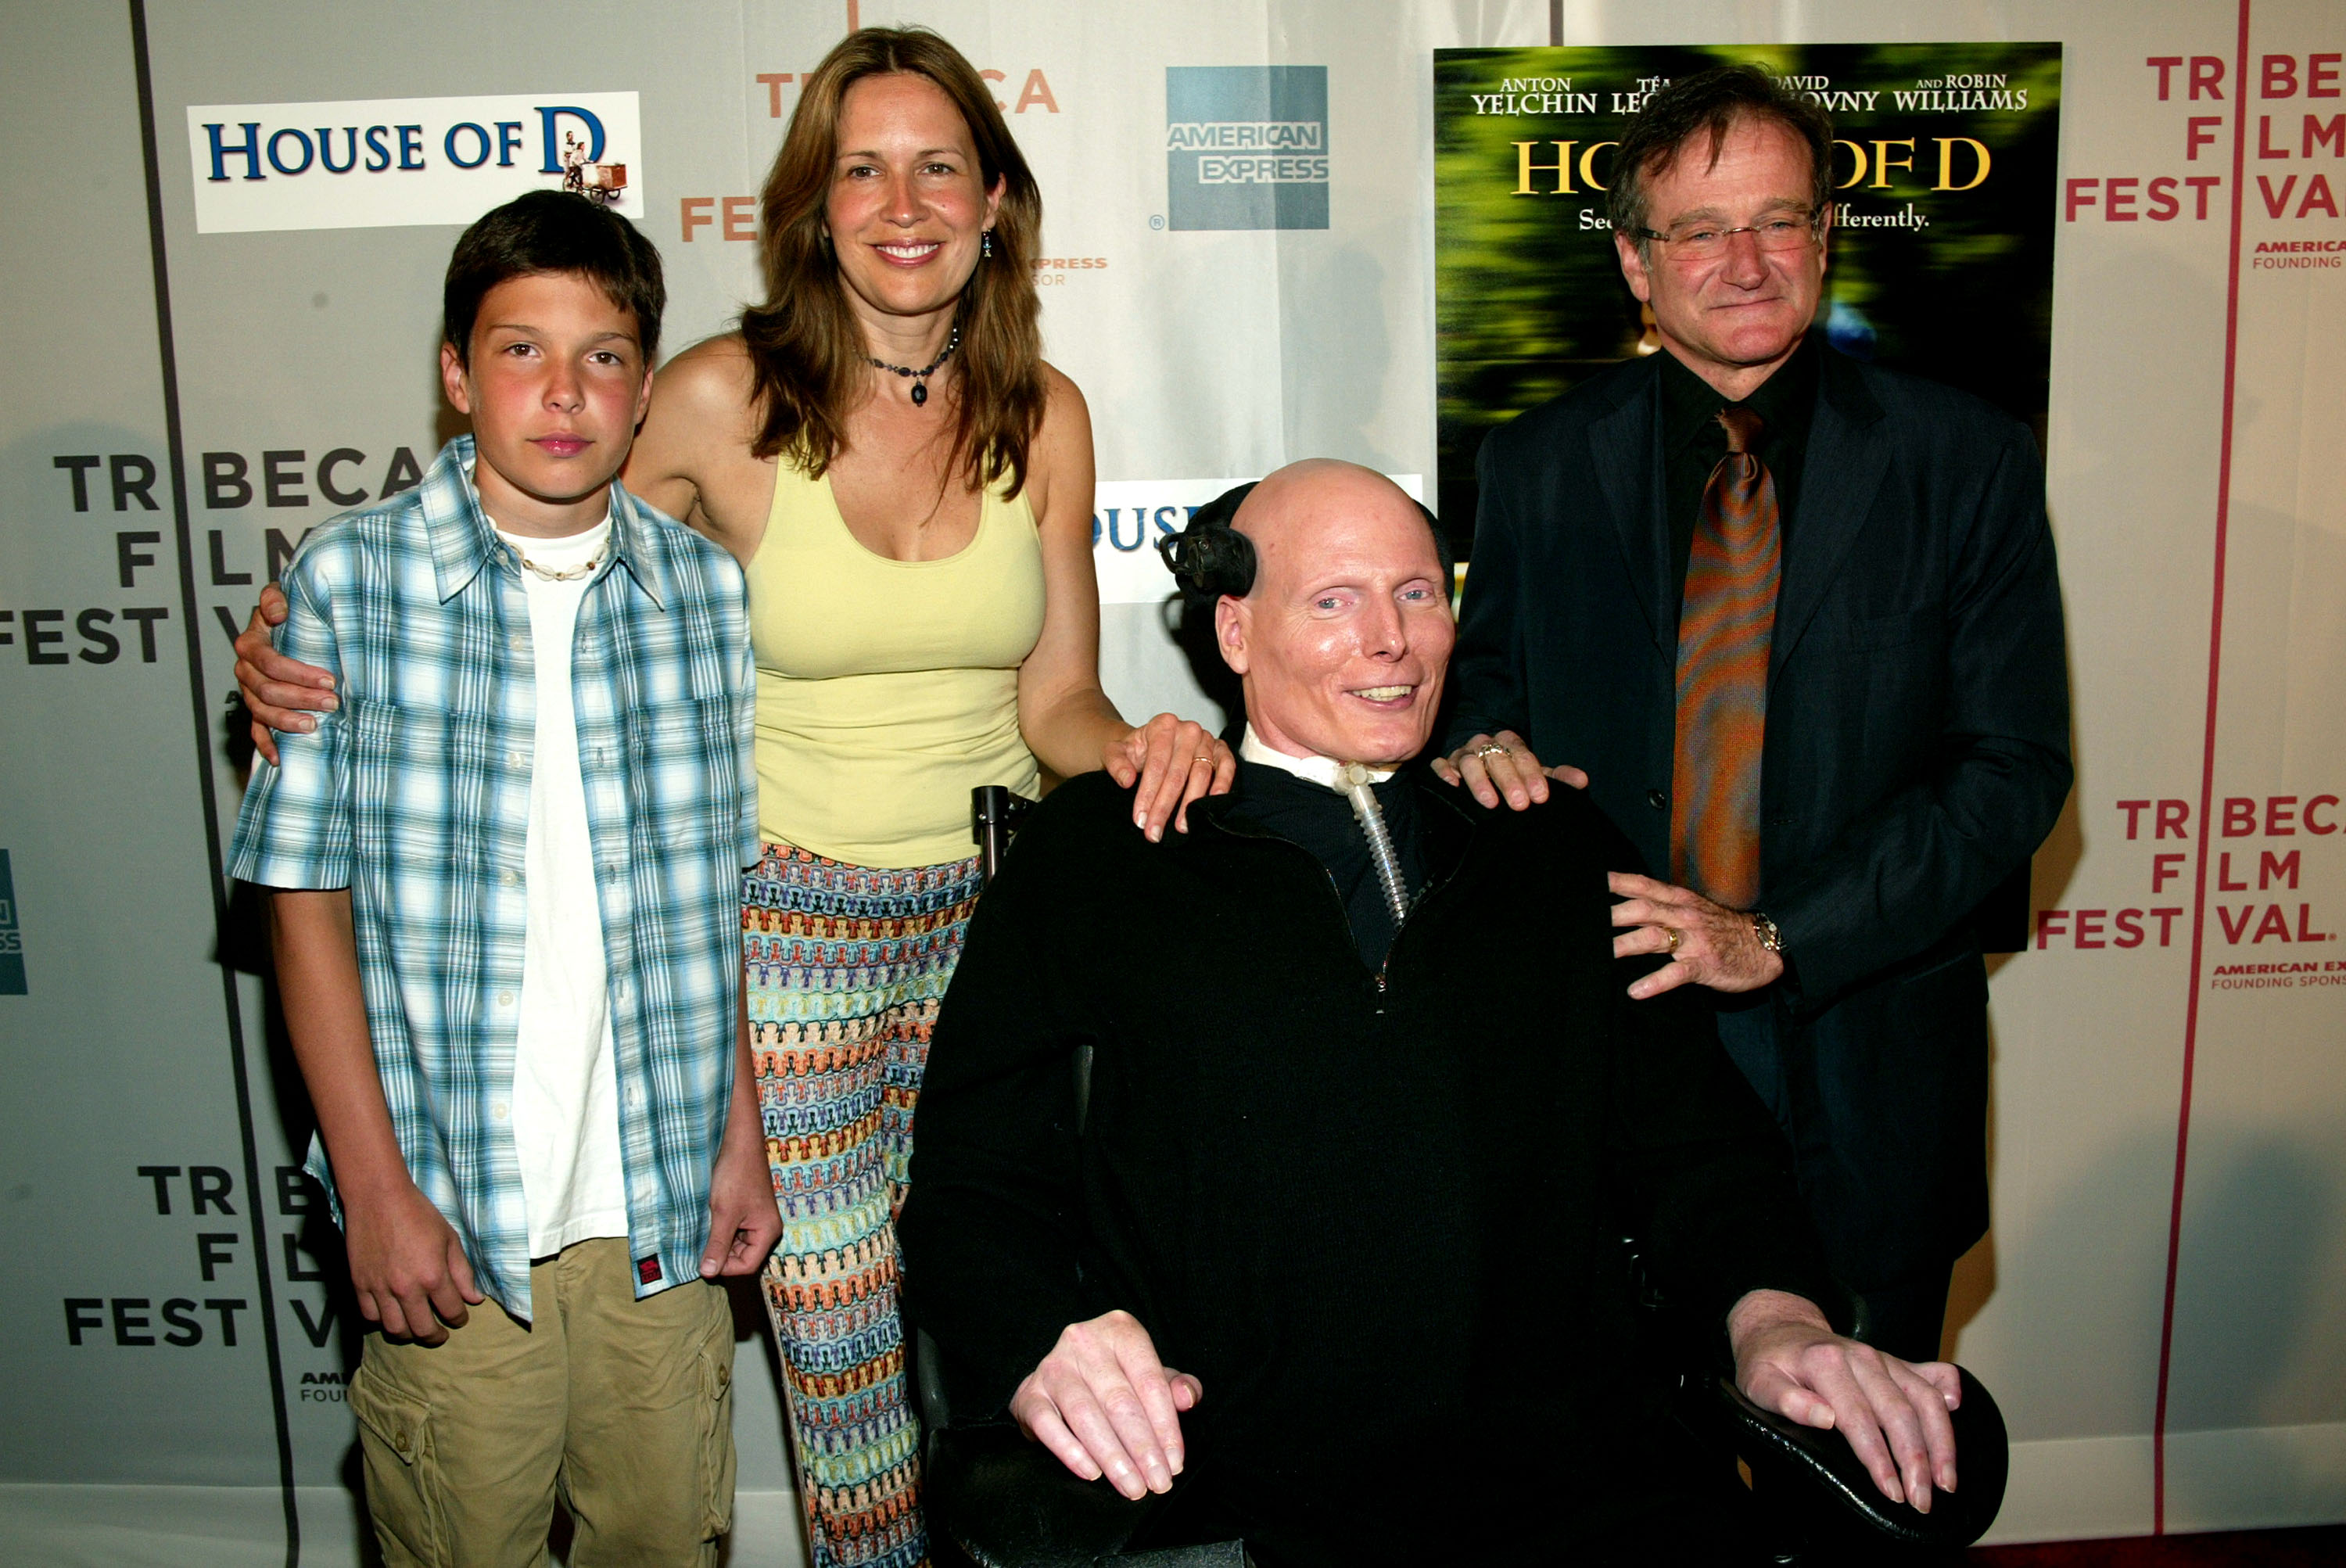 Actor Robin Williams (R) poses with actor Christopher Reeve, his wife Dana Reeve, and son Will (L) at the screening of "House Of D" during the 2004 Tribeca Film Festival May 7, 2004, in New York City. | Source: Getty Images